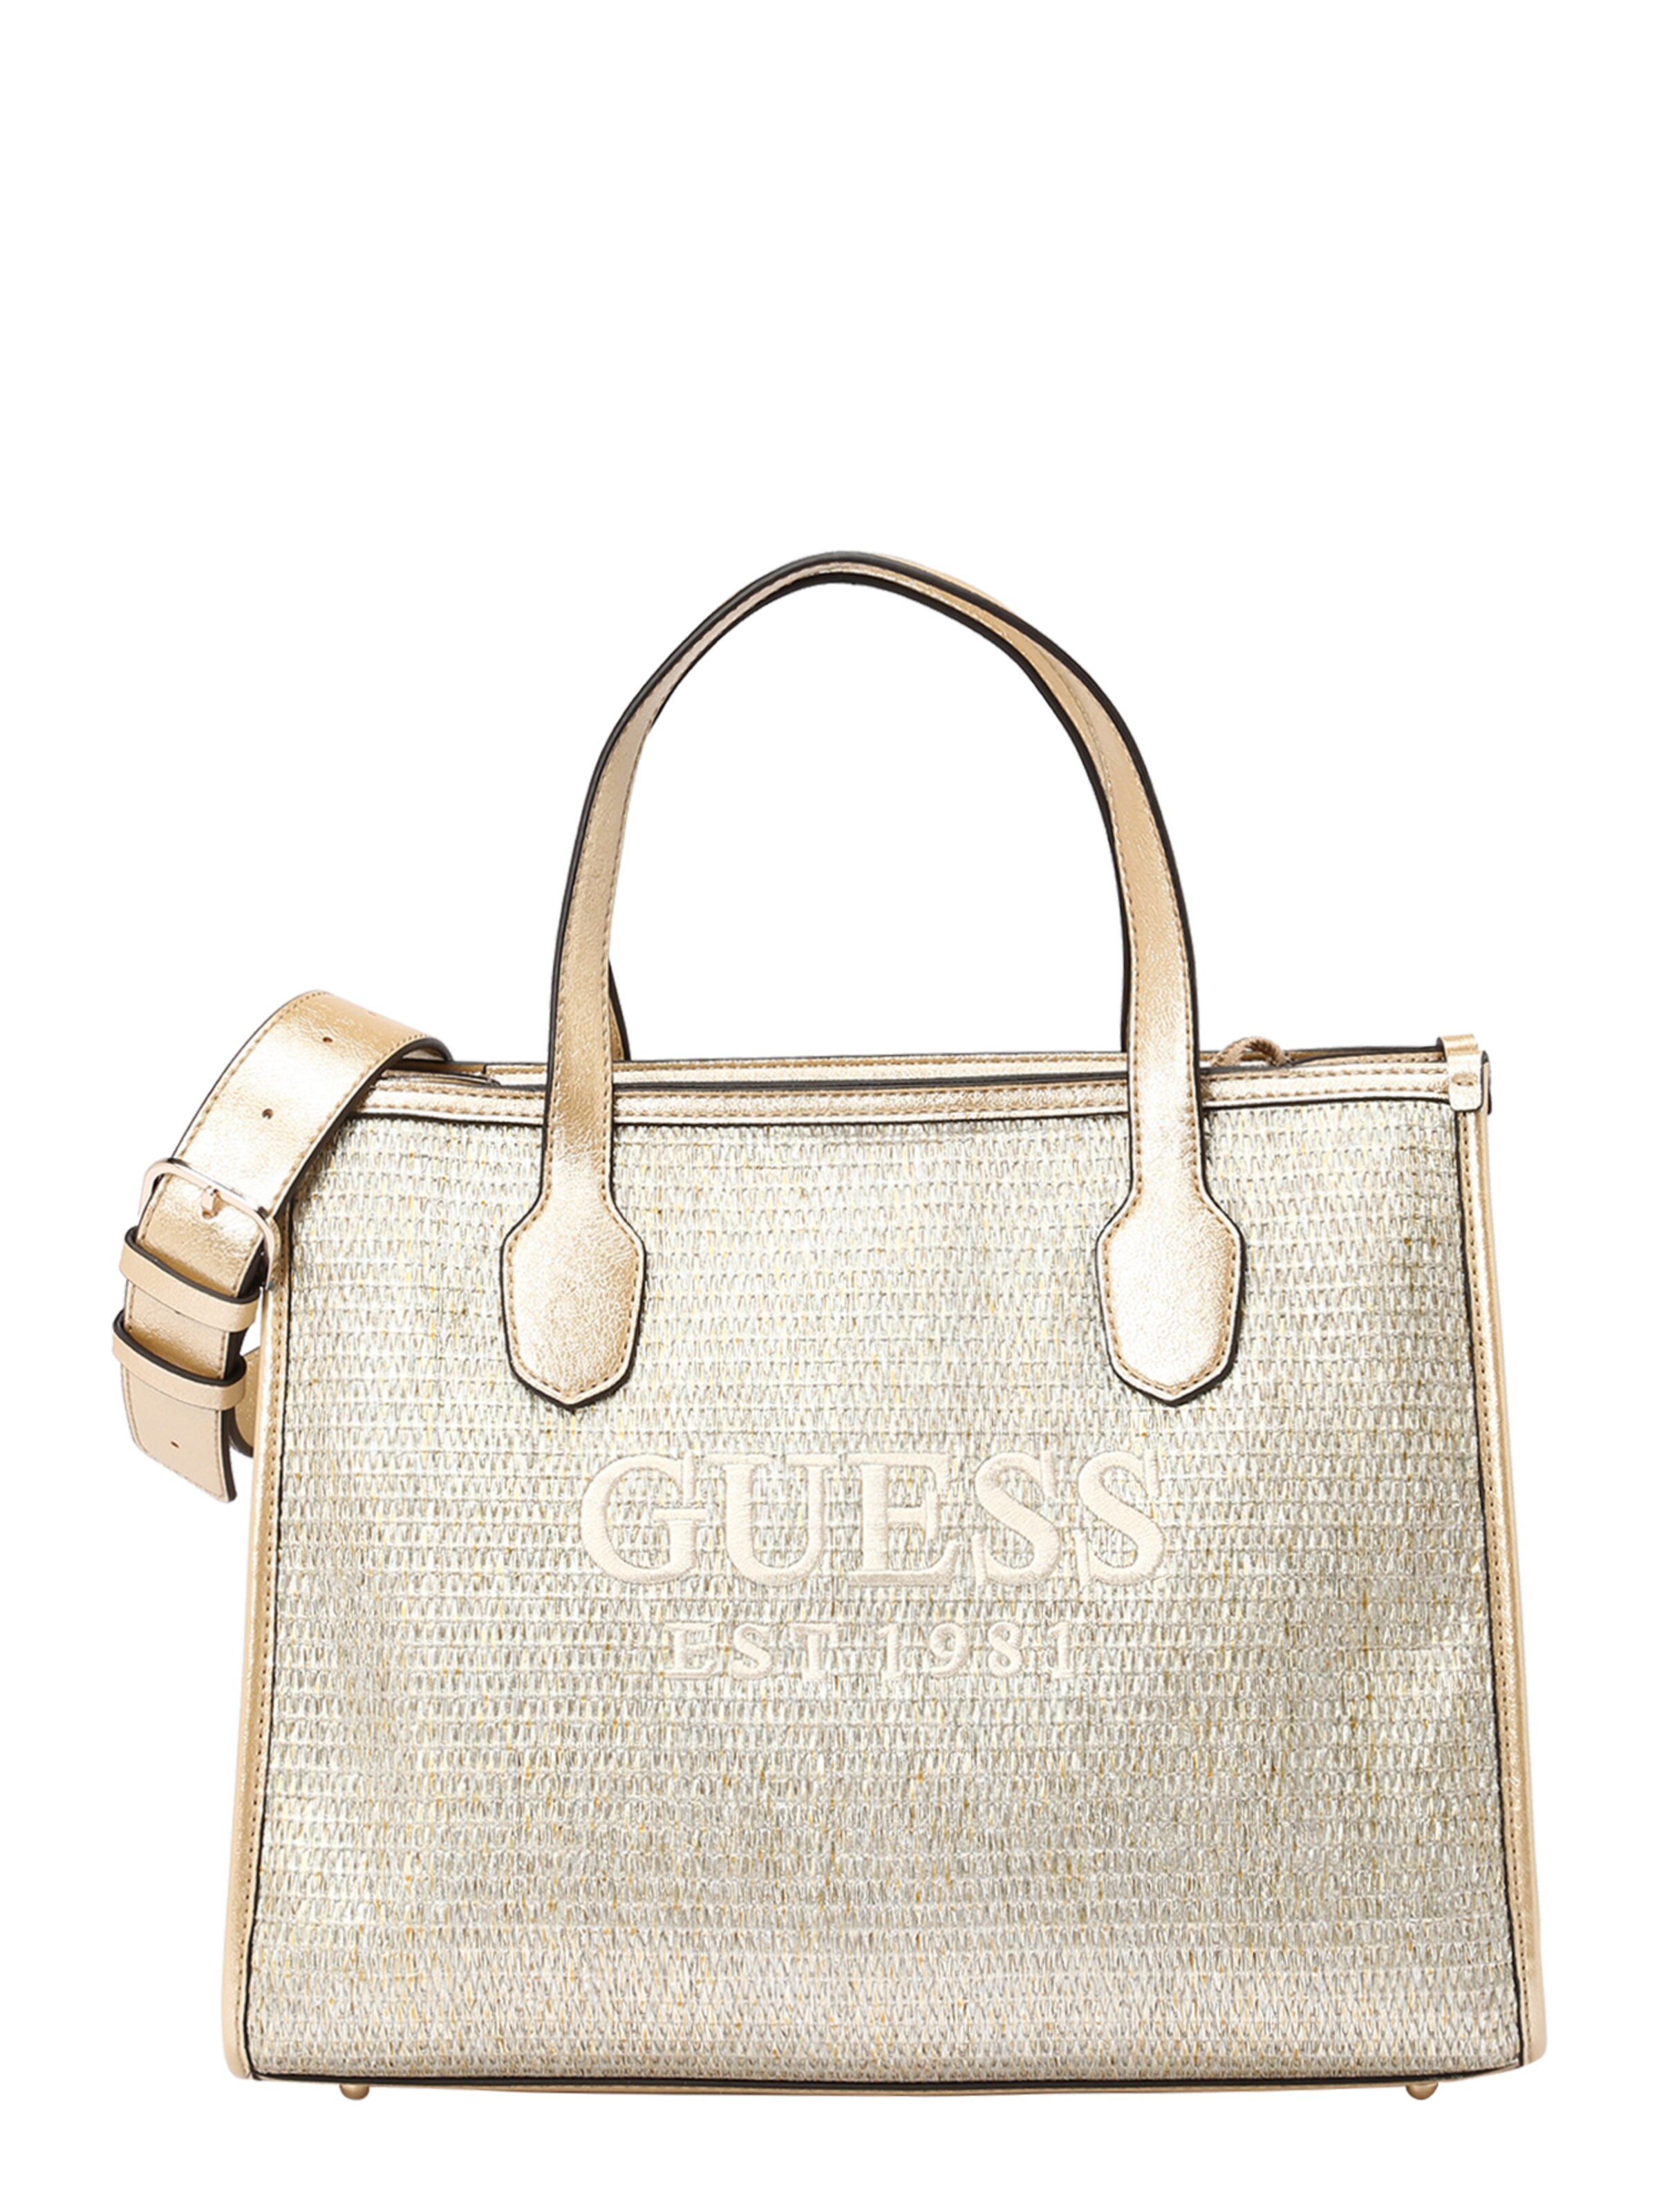 Guess purse, excellent condition, white and gold,... - Depop